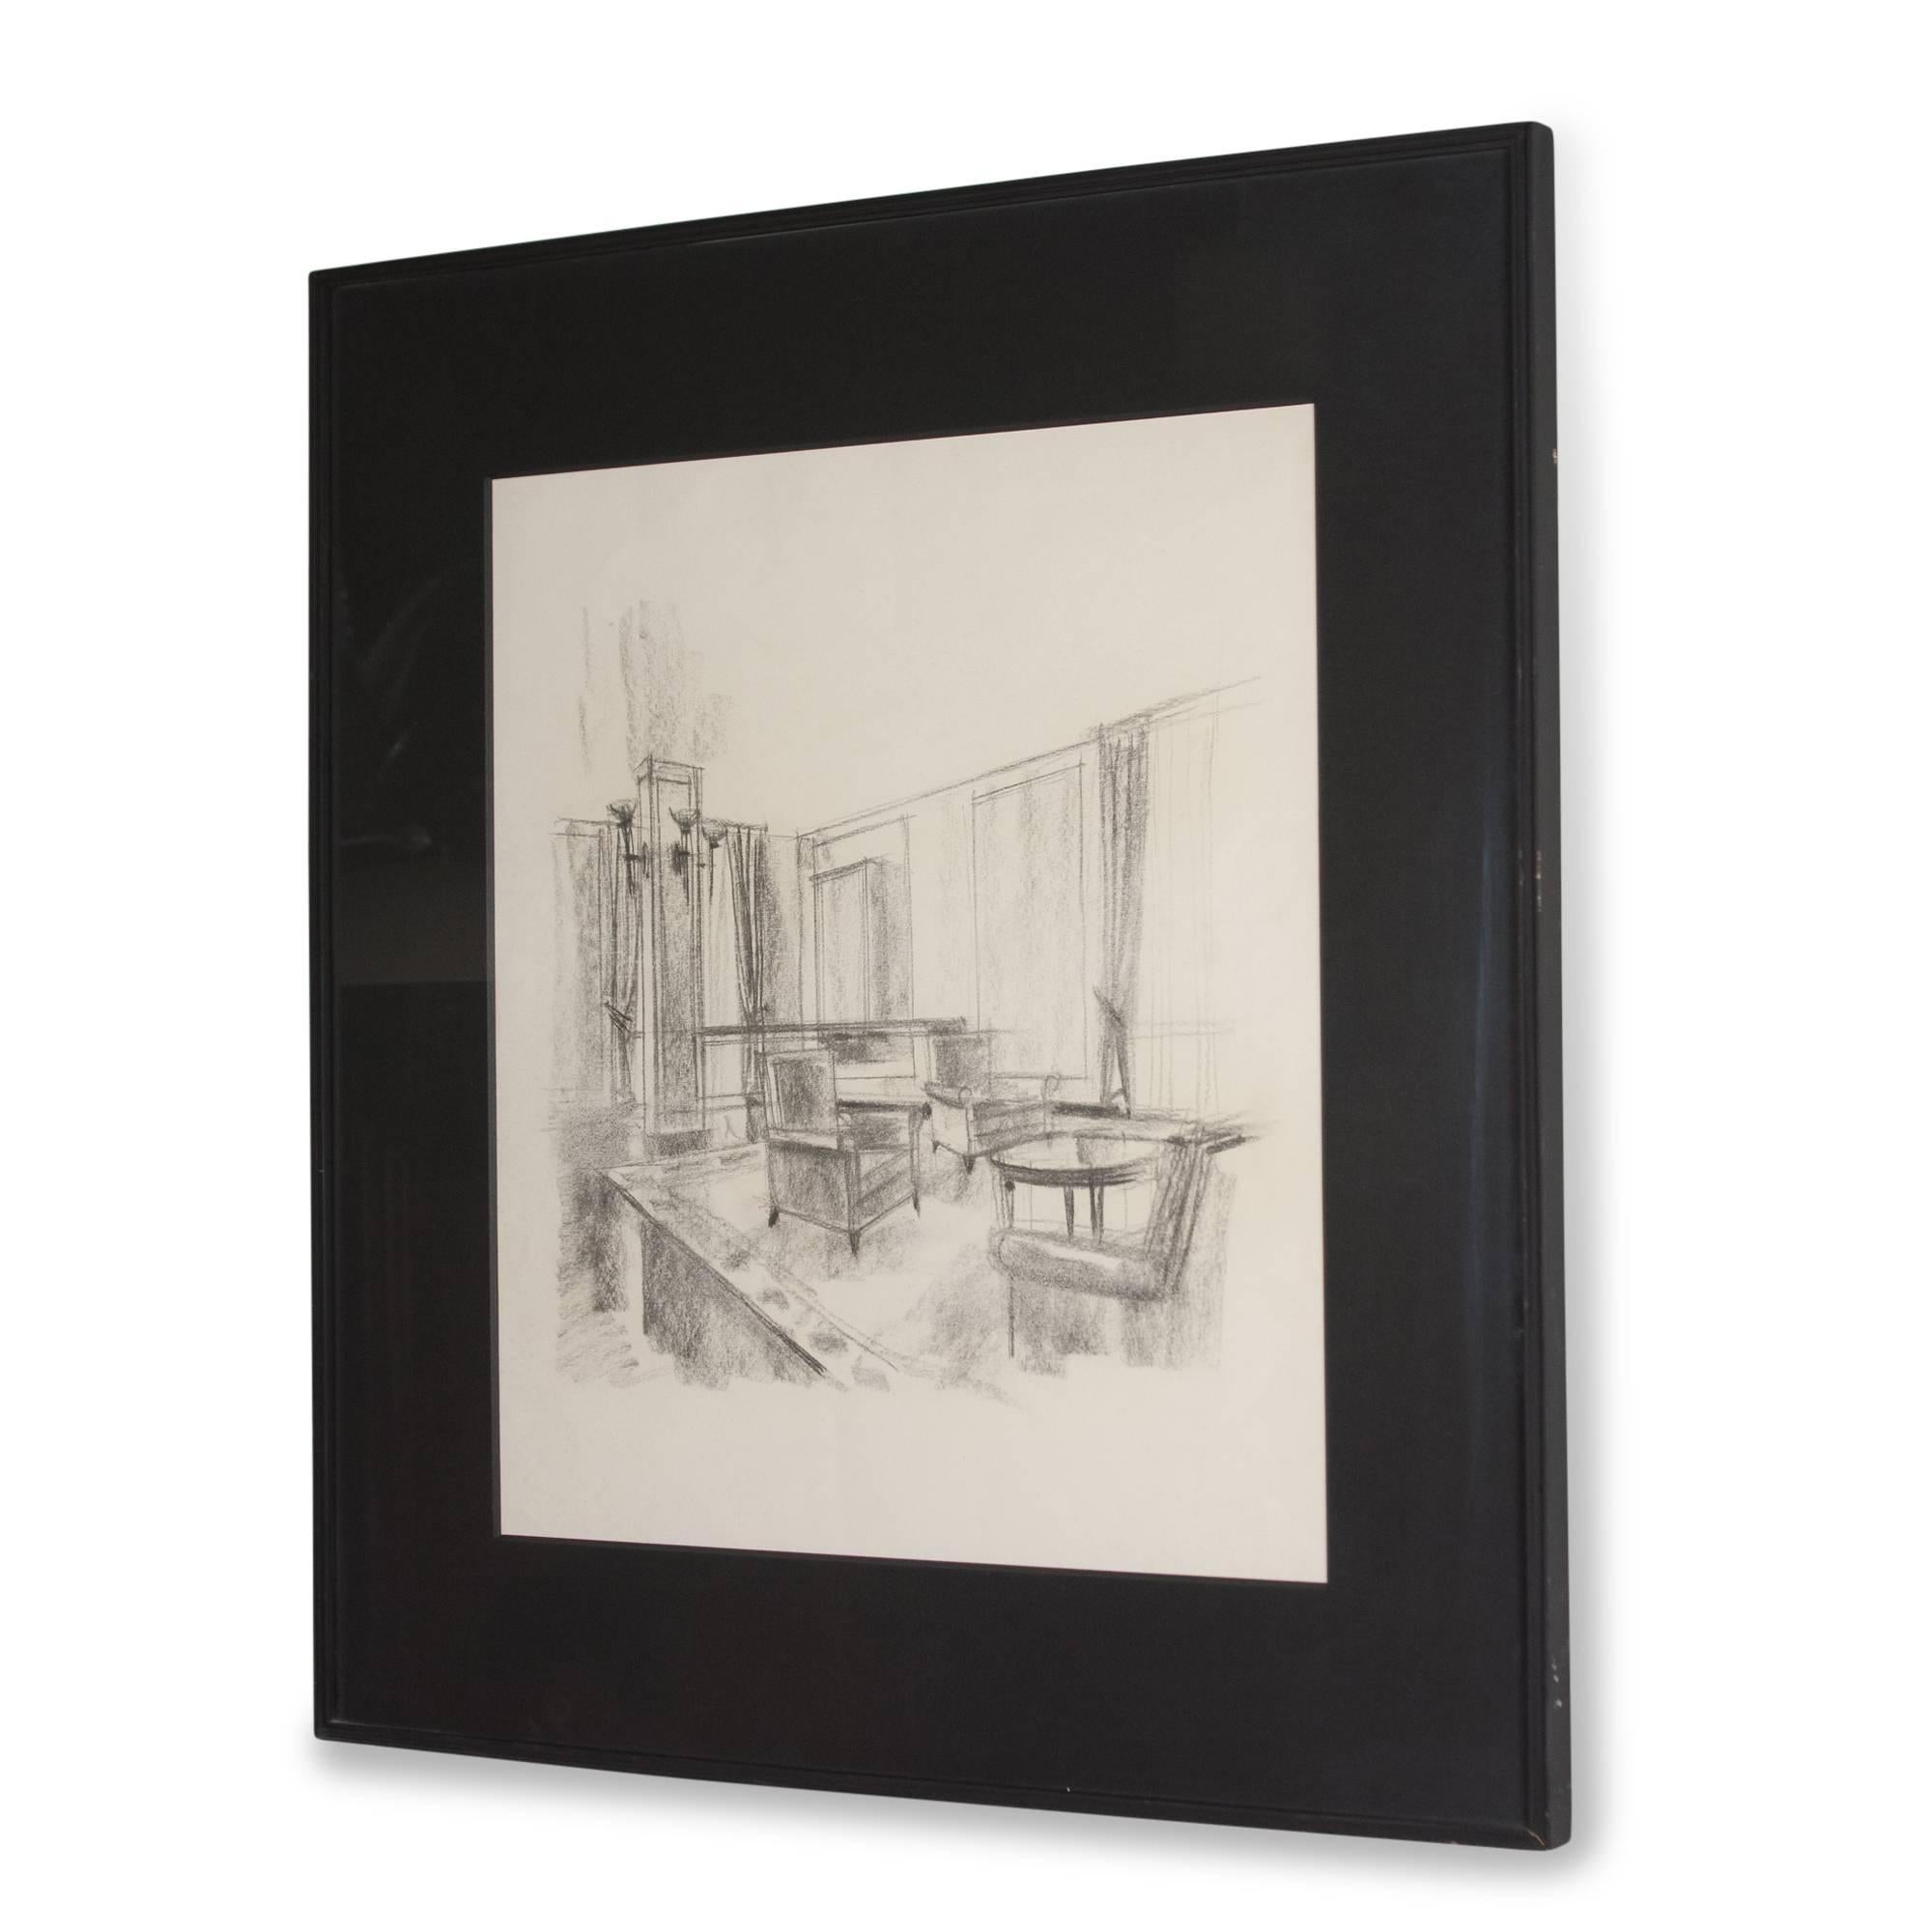 Pencil and charcoal on paper, interior scene, French, 1940s. Framed. Measures: Height 29 in, width 26 in. (sats)